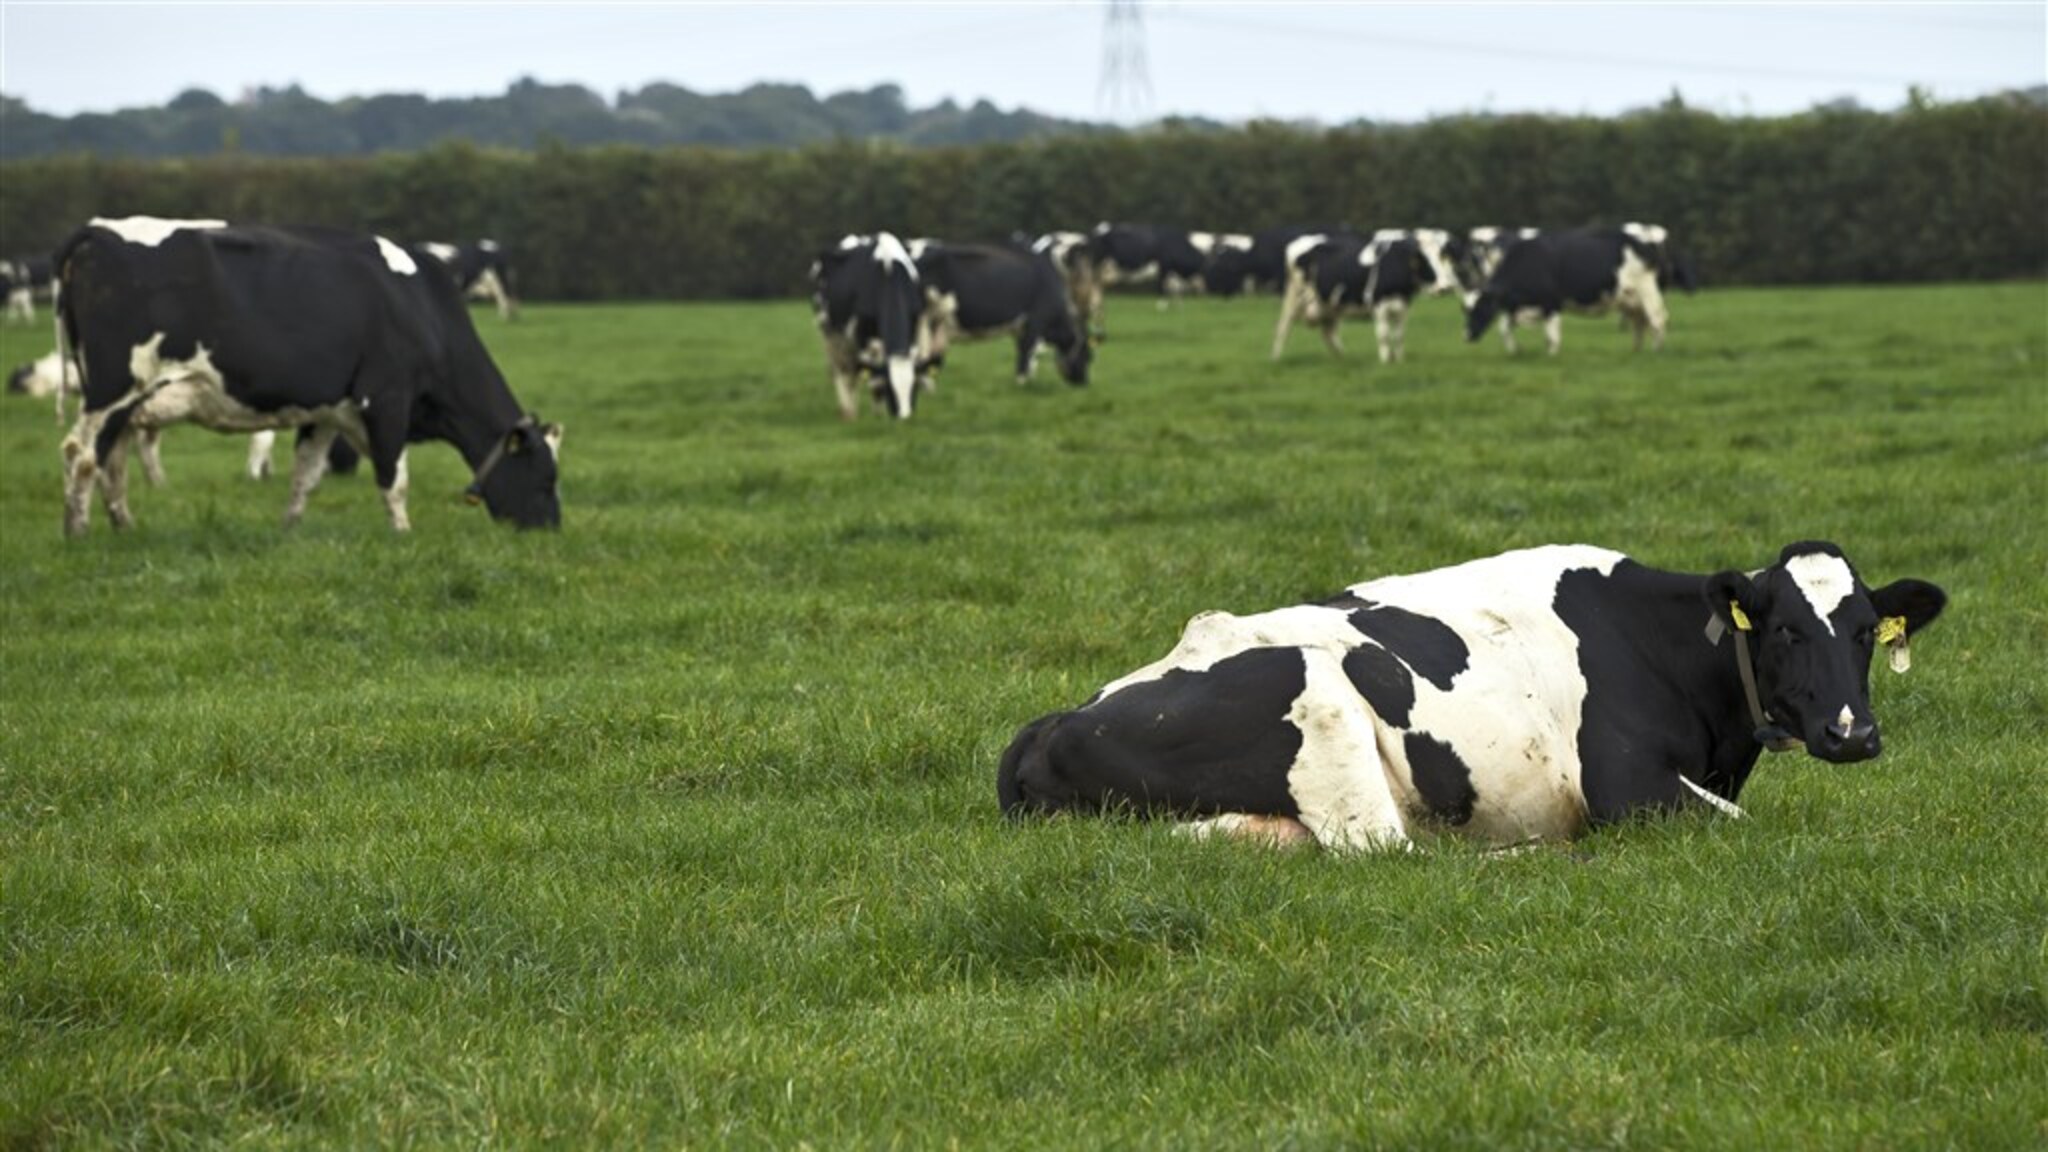 The government's approach to nitrogen will reduce livestock by 30 percent in the coming years